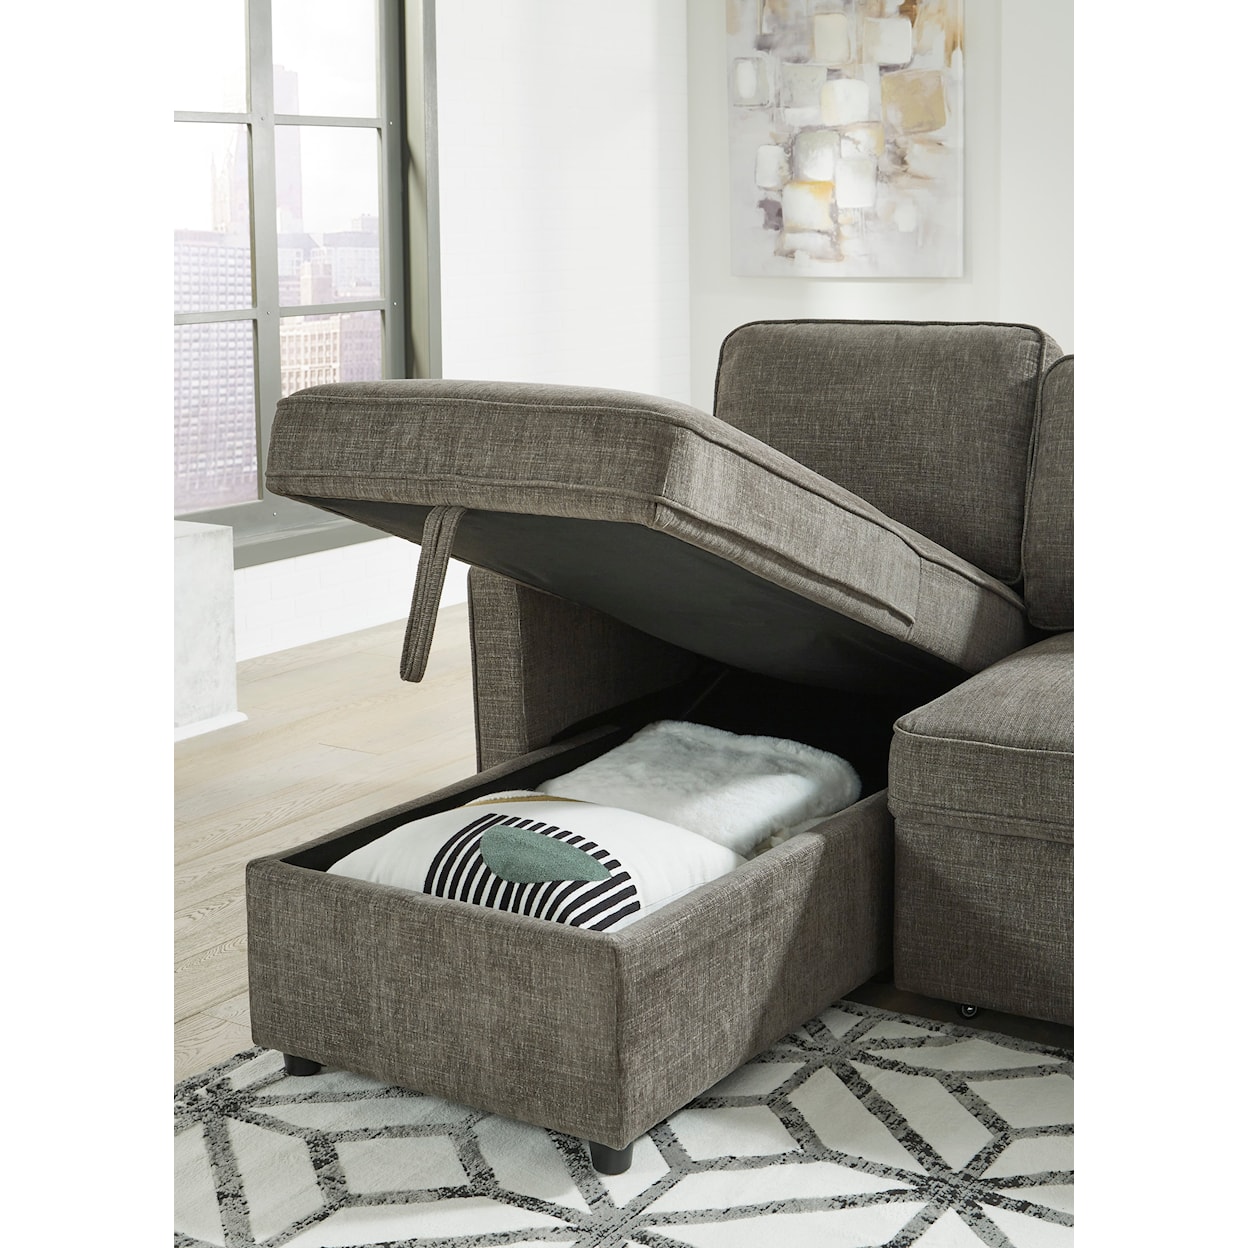 Signature Design by Ashley Kerle 2-Piece Sectional with Pop Up Bed